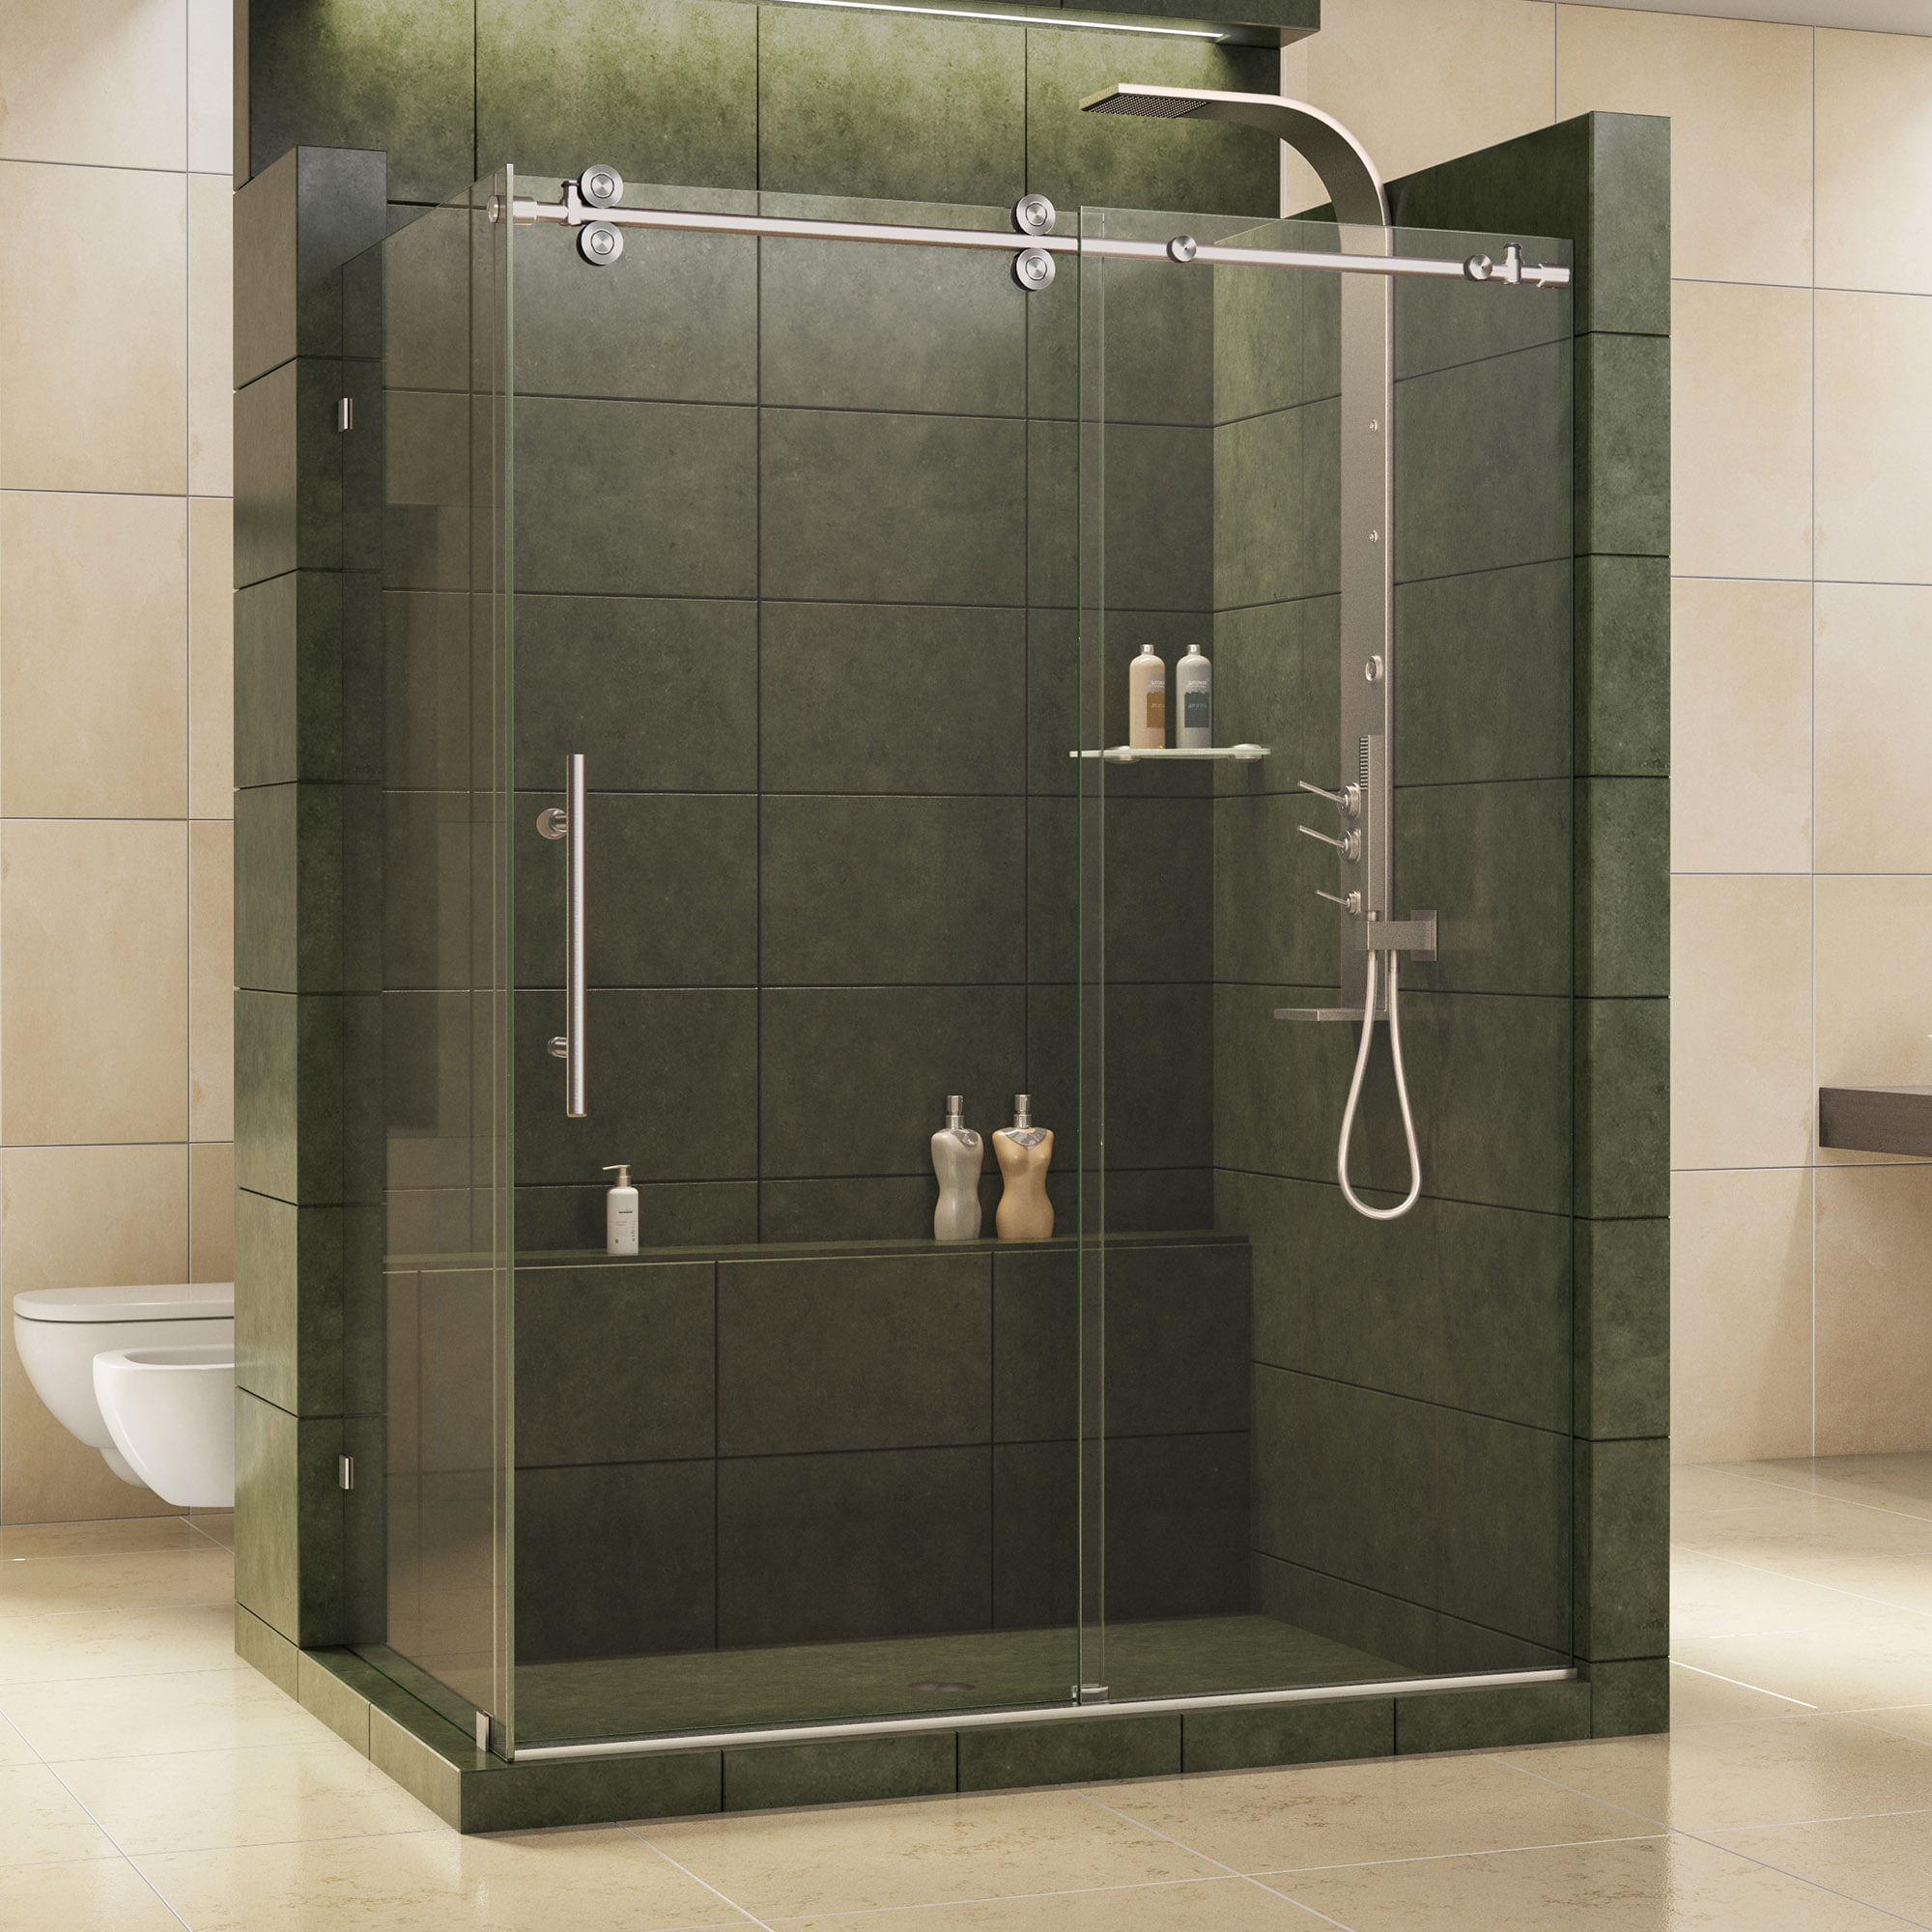 DreamLine Enigma 36 in. D x 60 1/2 in. W x 79 in. H Frameless Sliding Shower Enclosure in Brushed Stainless Steel, 1/2 in. Glass